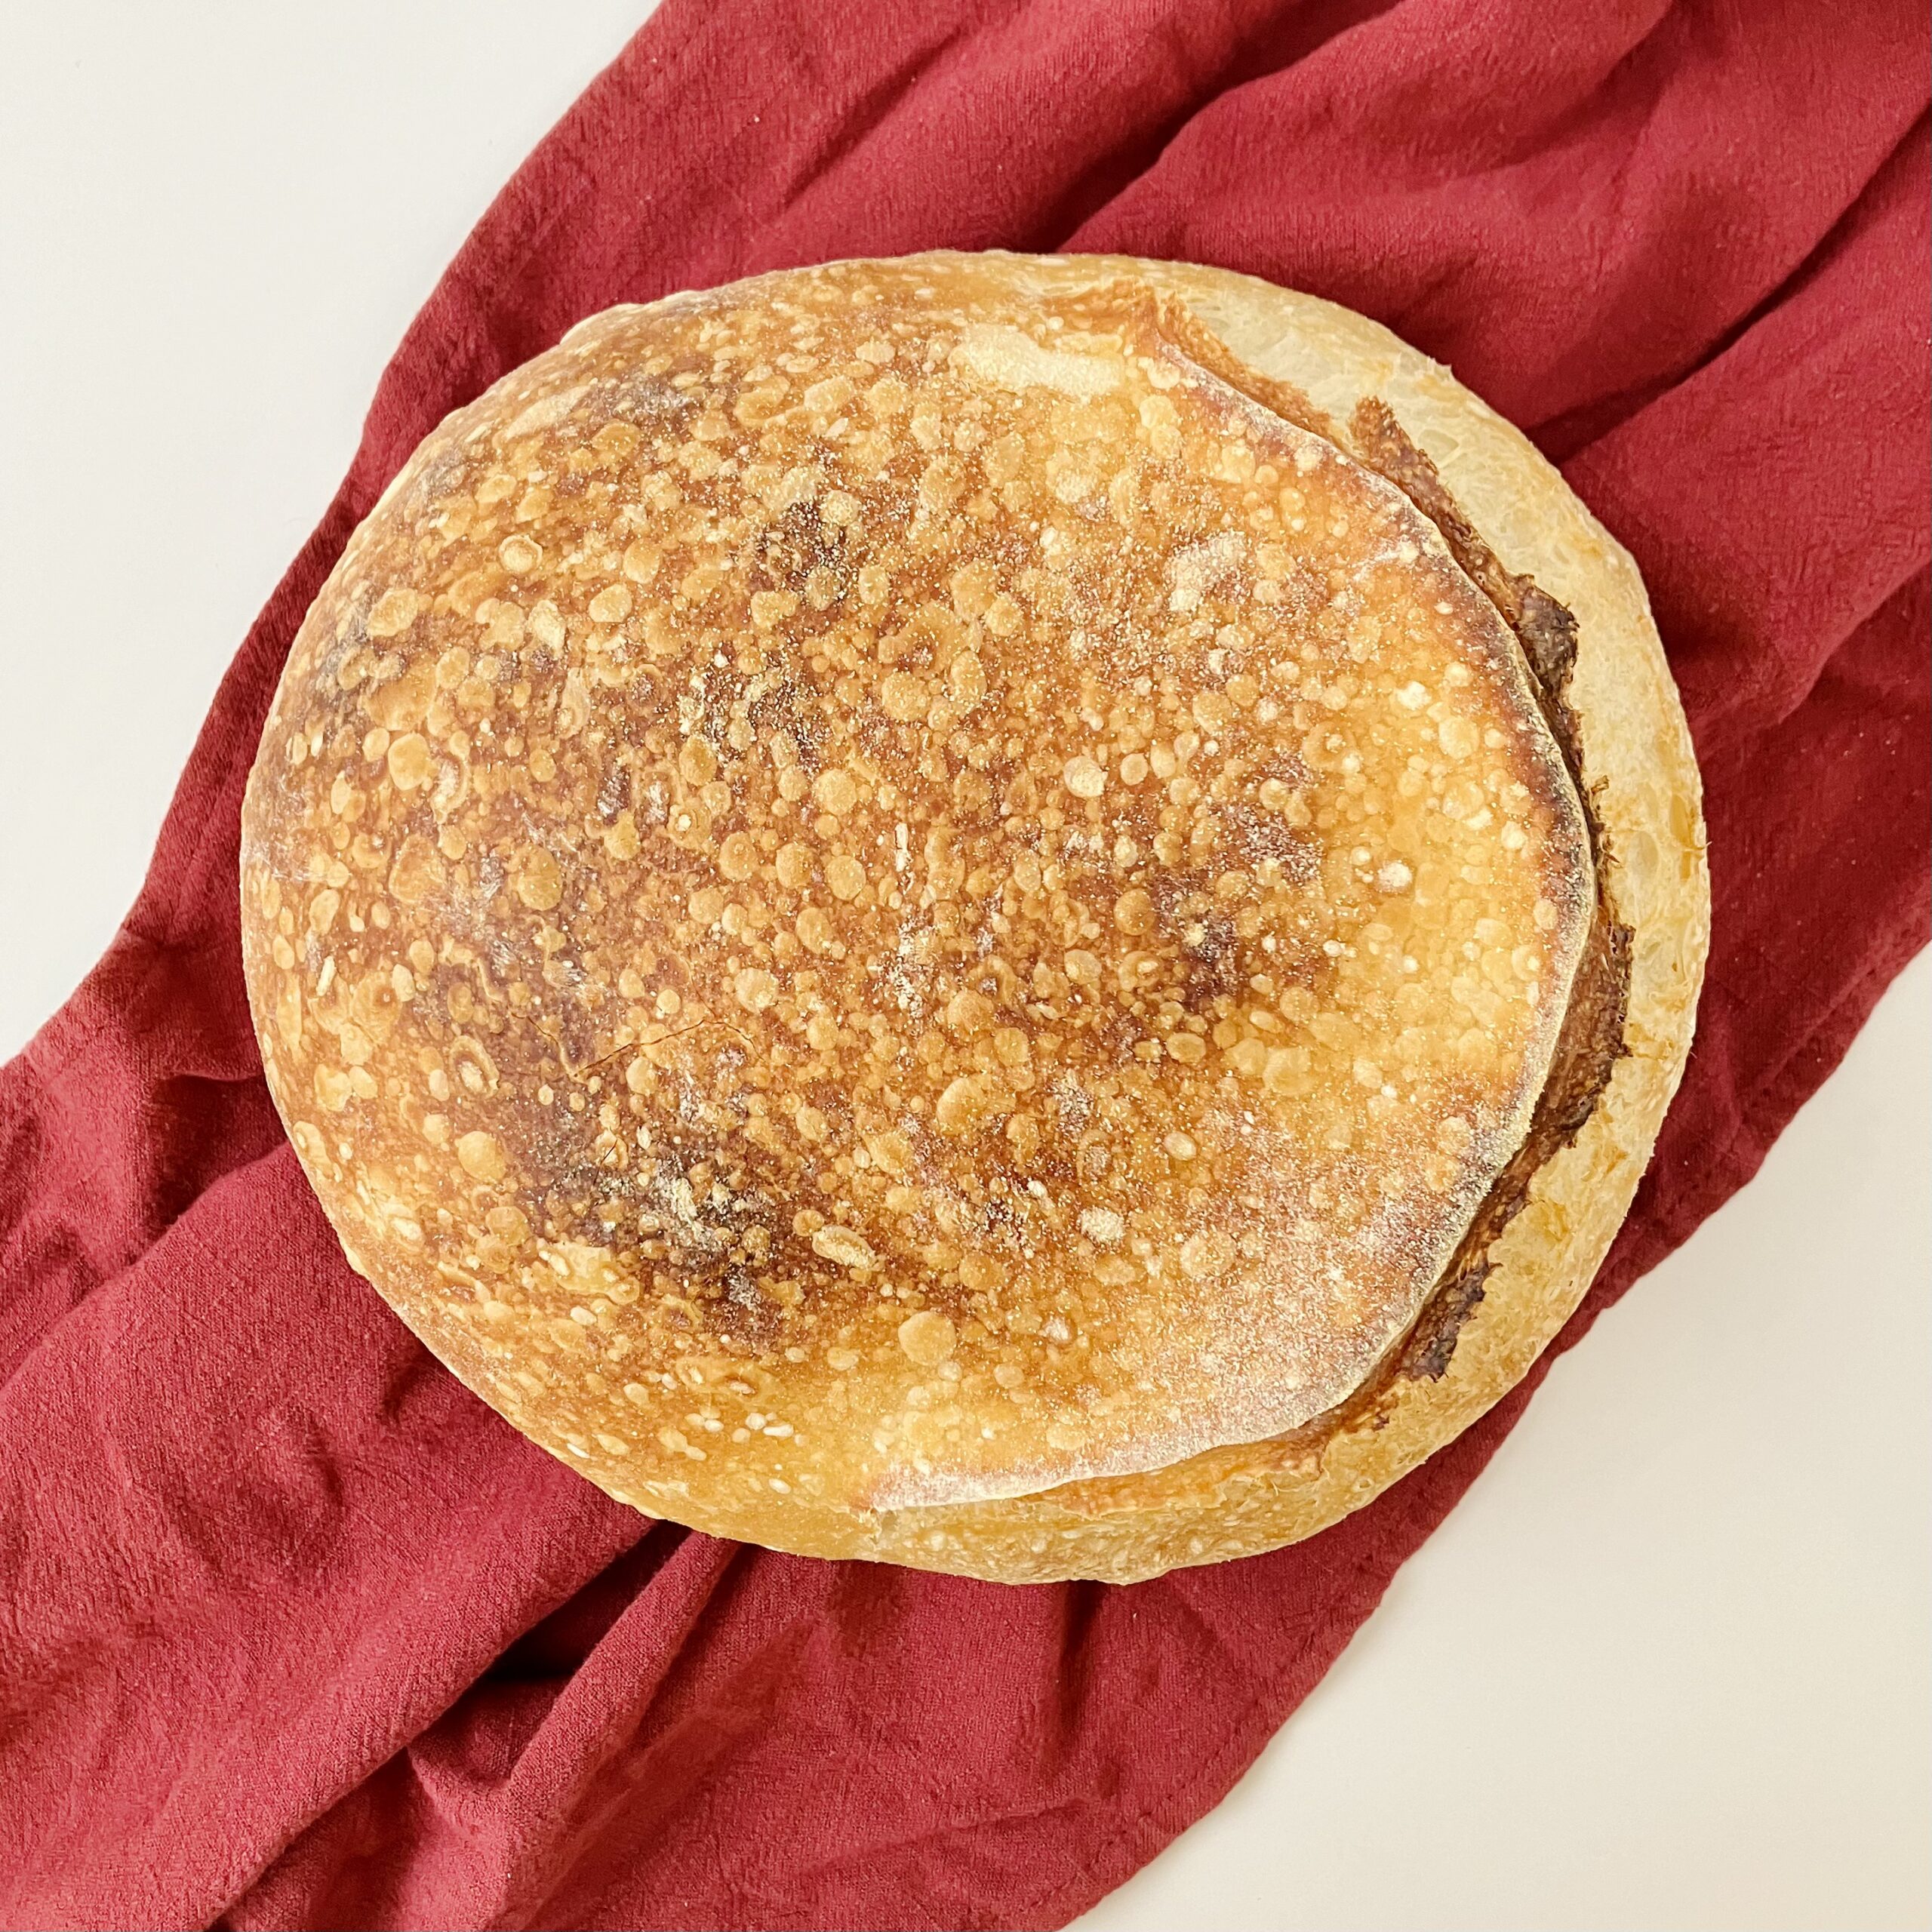 Sourdough Artisan loaf, also known as country boule